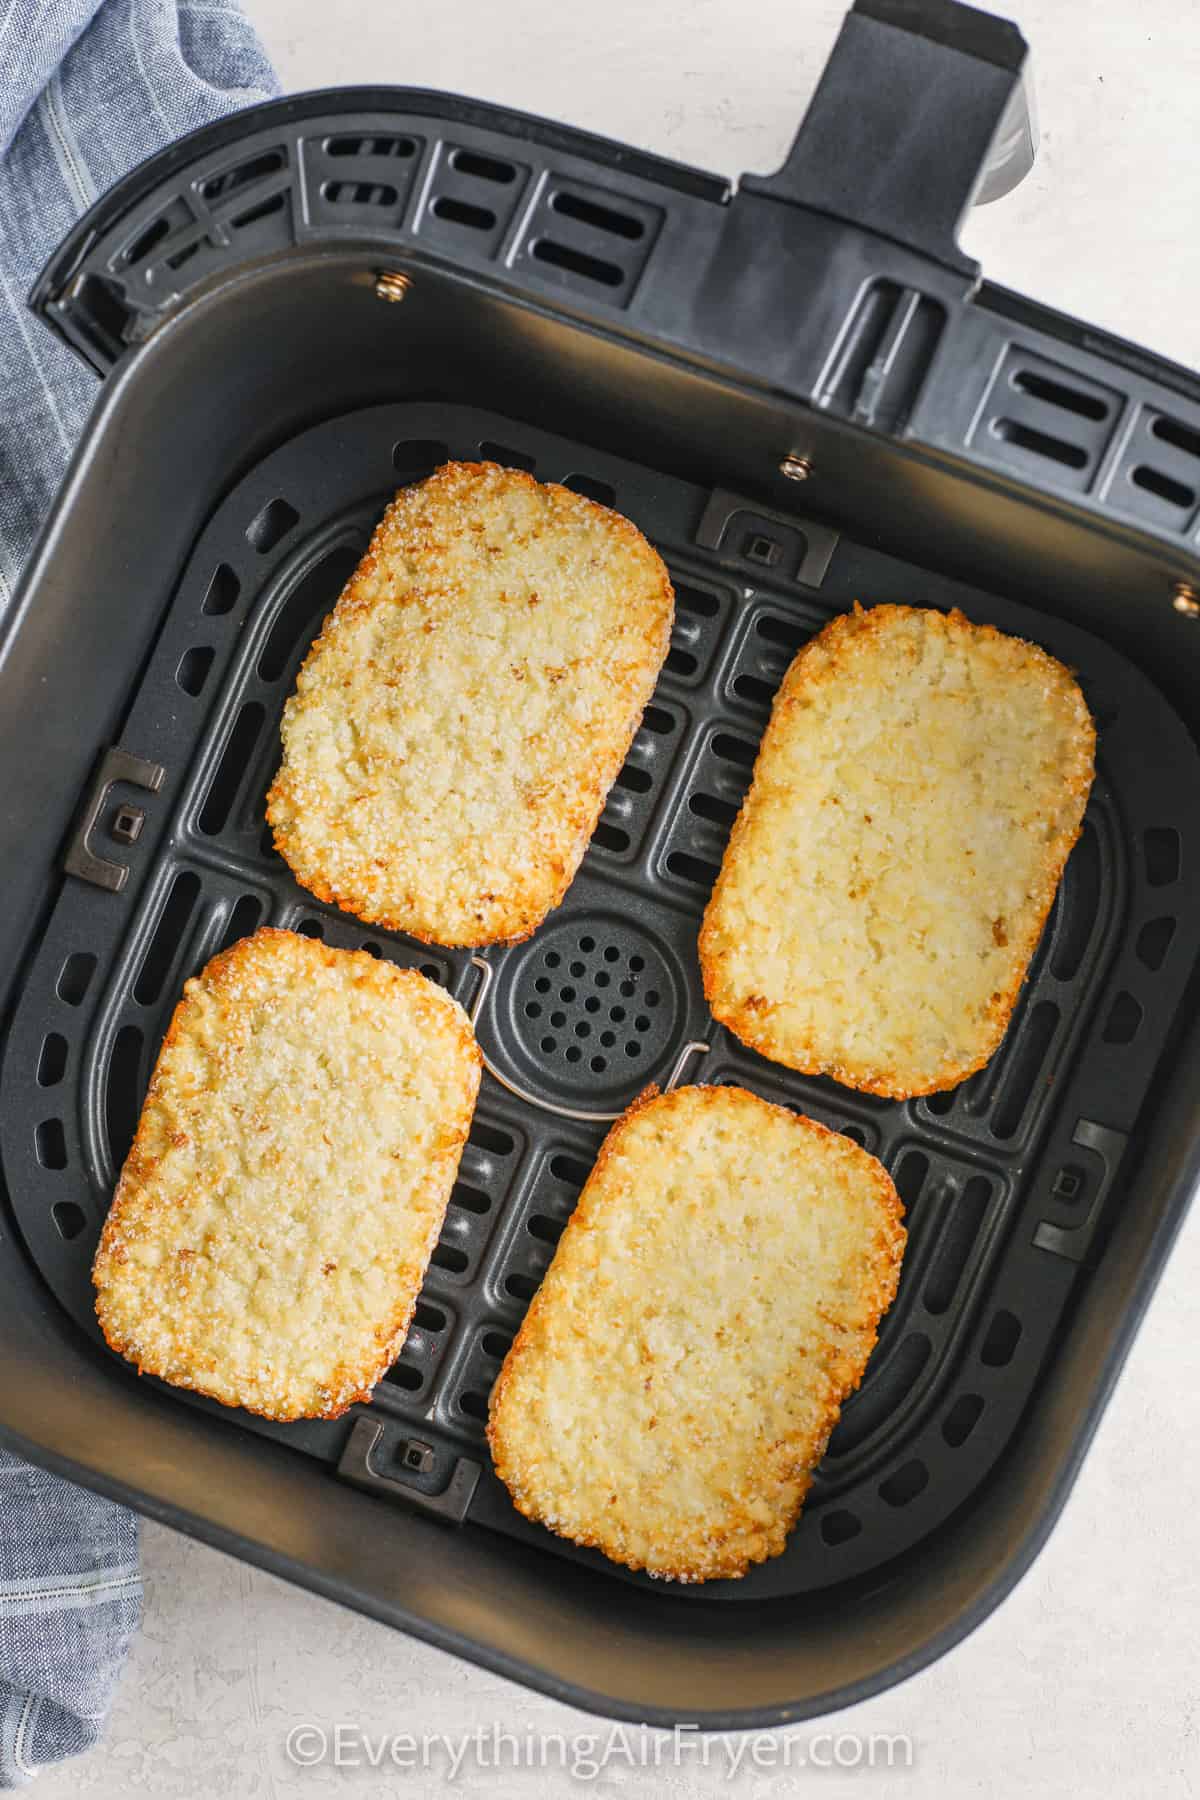 Frozen Hash Browns in the Air Fryer before cooking